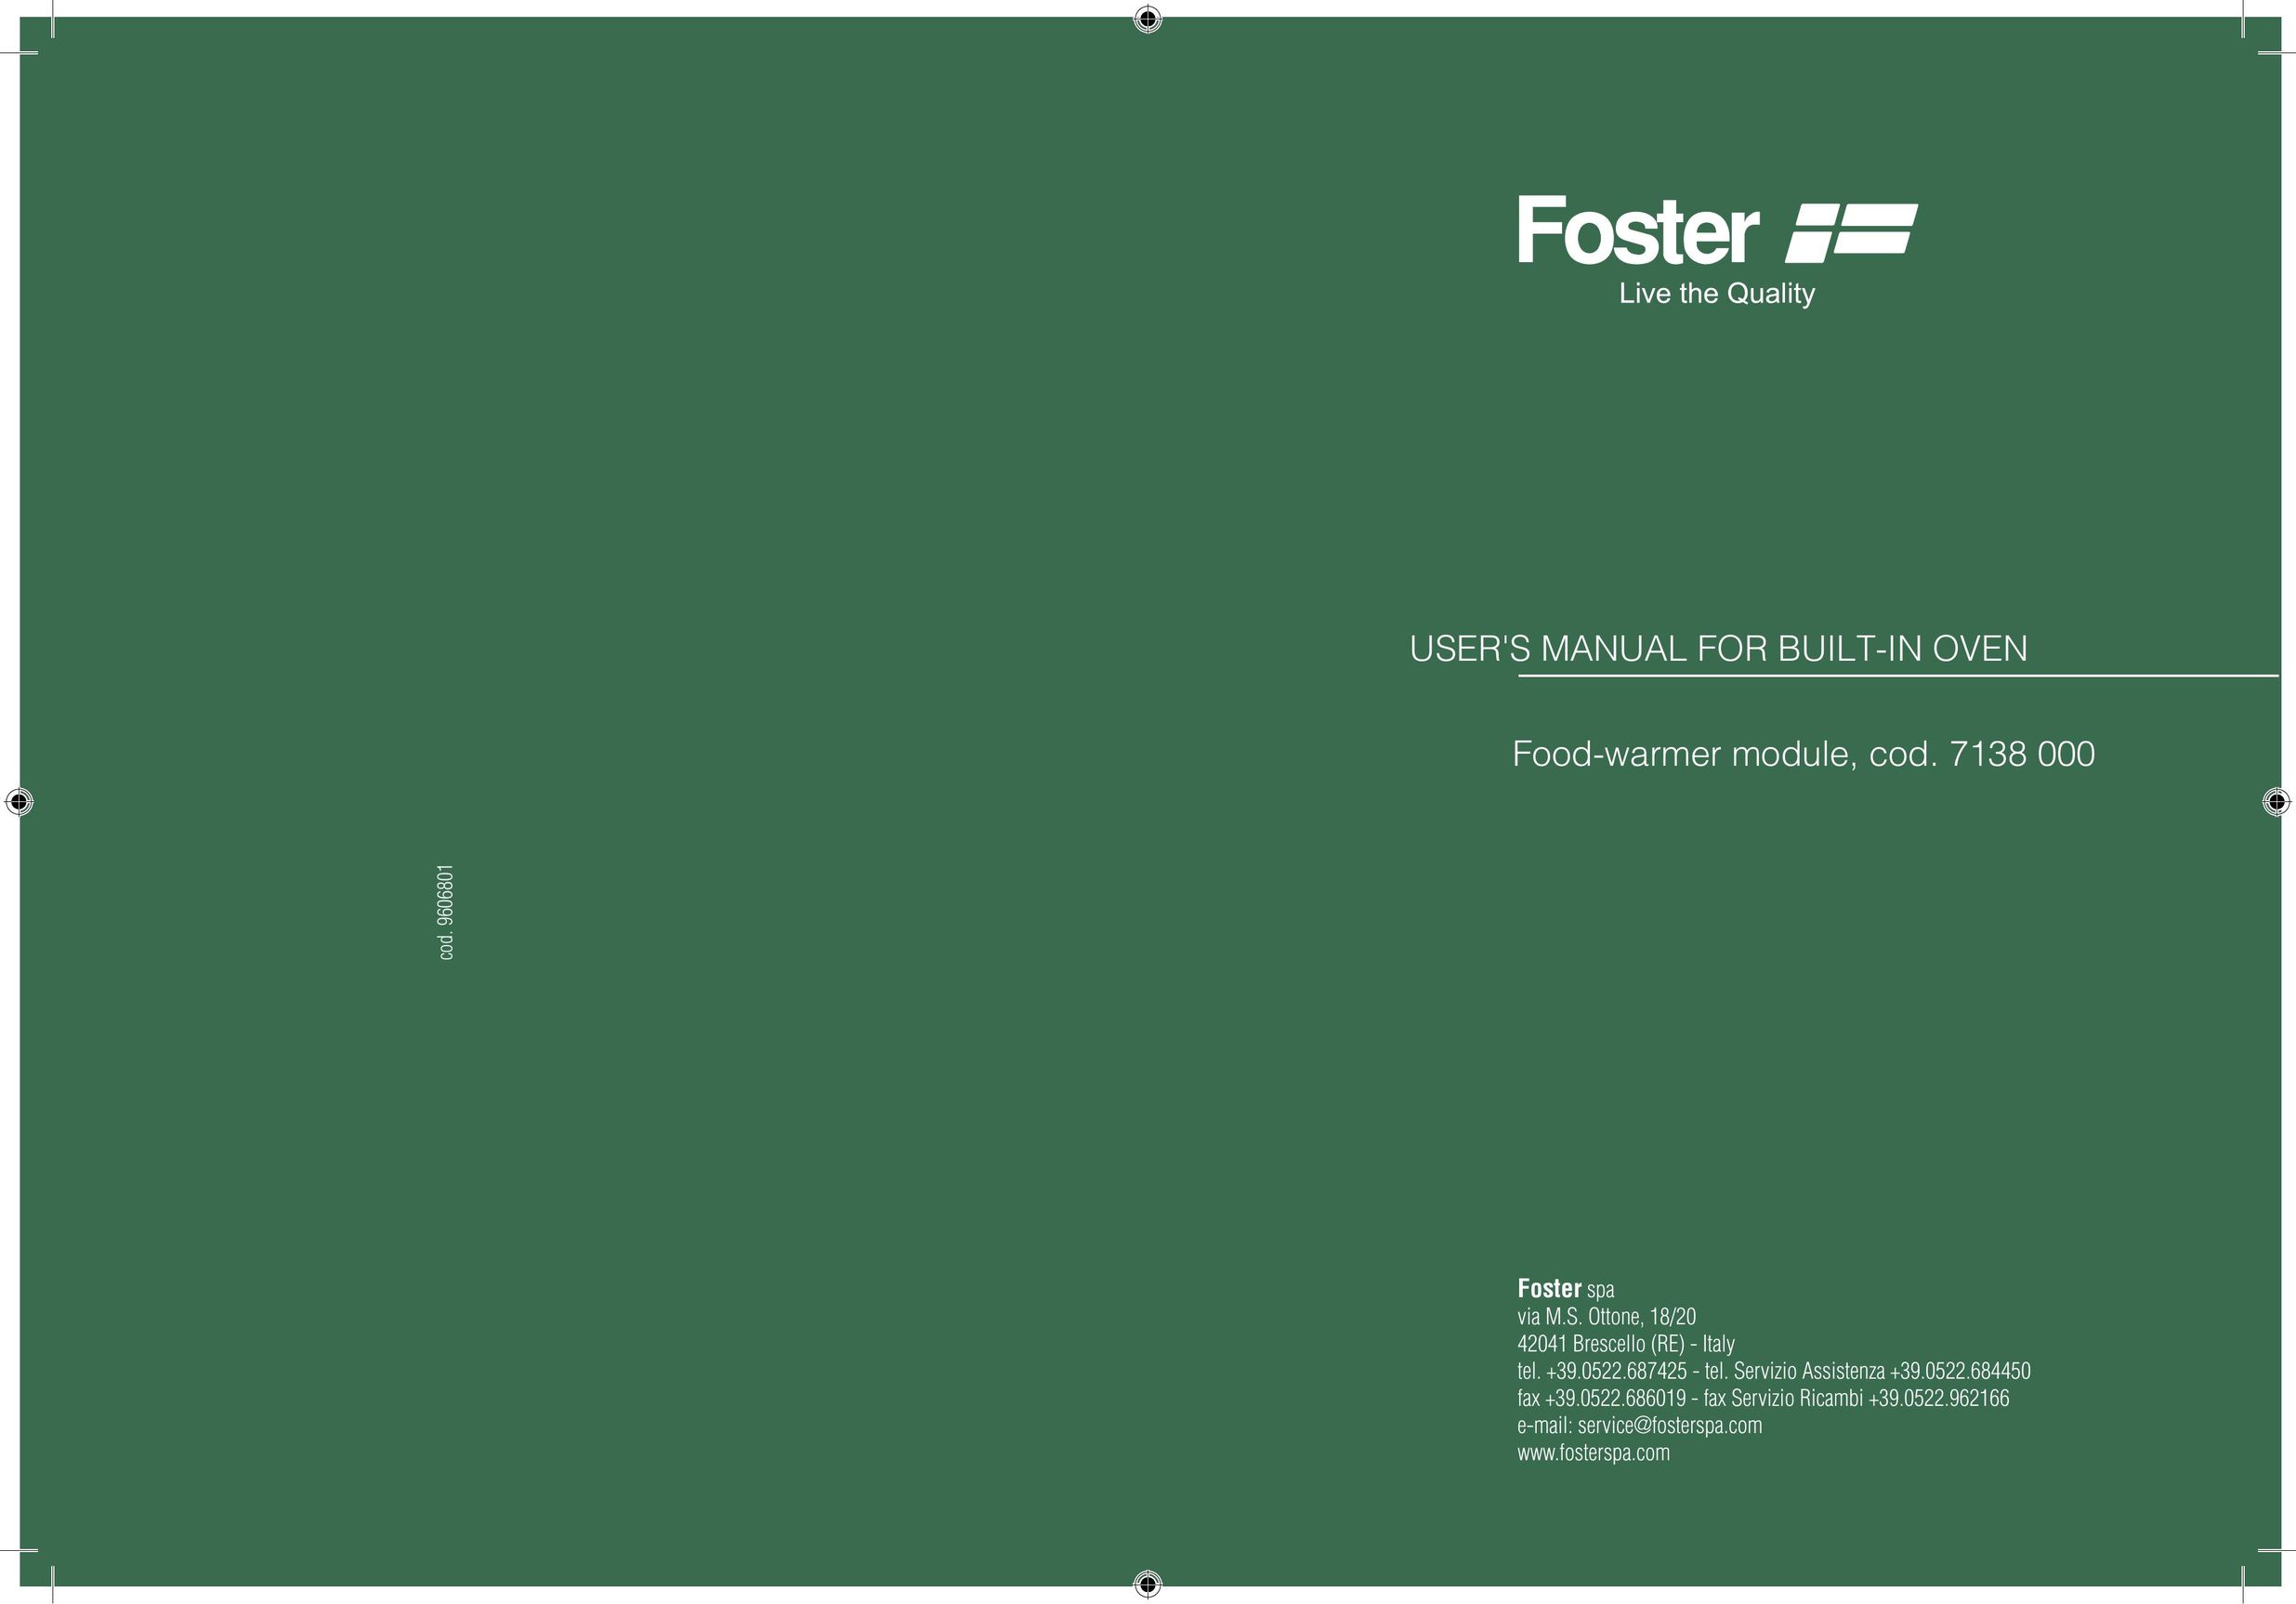 Foster cod.7138 000 Oven User Manual